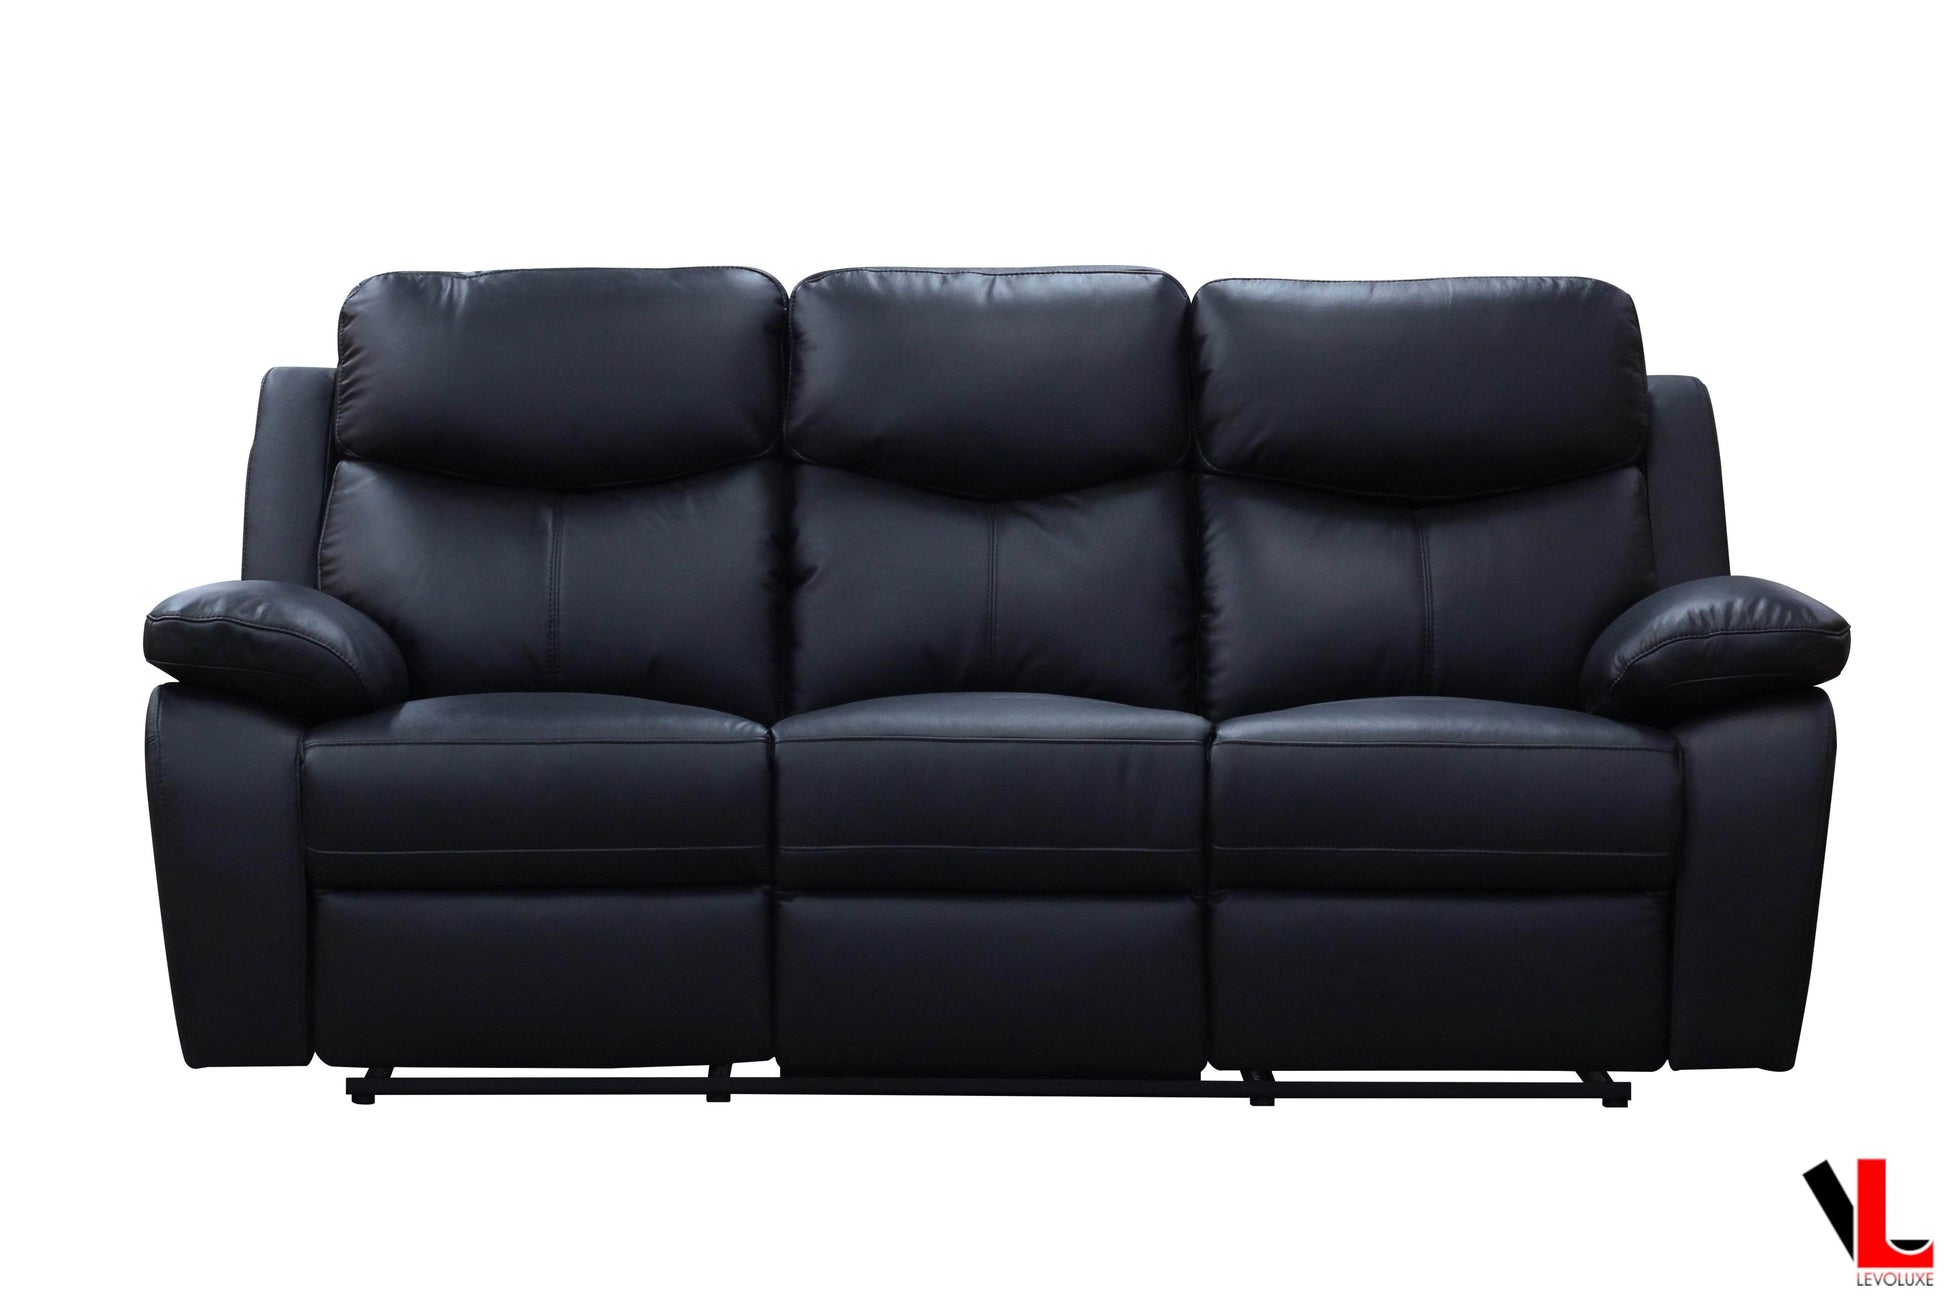 Pending - Levoluxe Aveon 3 Piece Pillow Top Arm Reclining Sofa, Loveseat and Chair Set in Leather Match - Available in 2 Colours